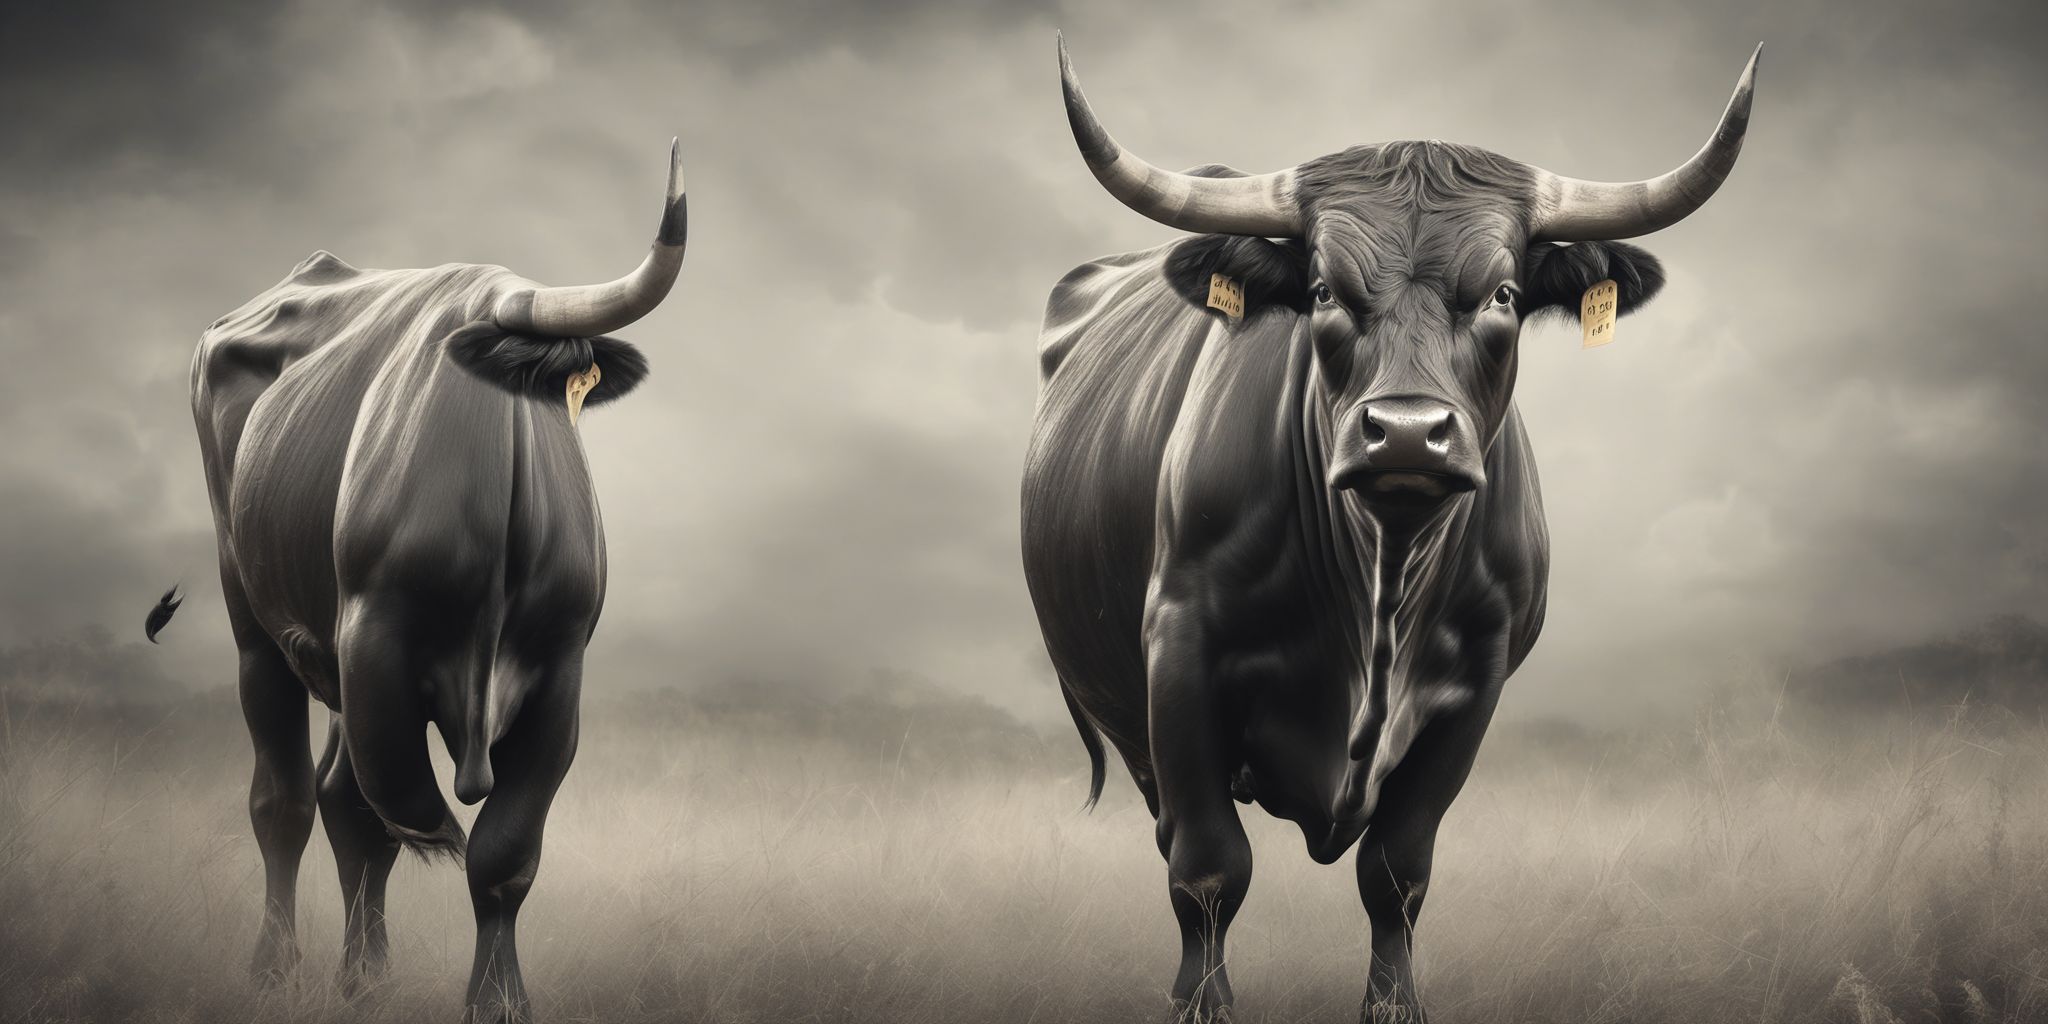 Stocks: Bull  in realistic, photographic style